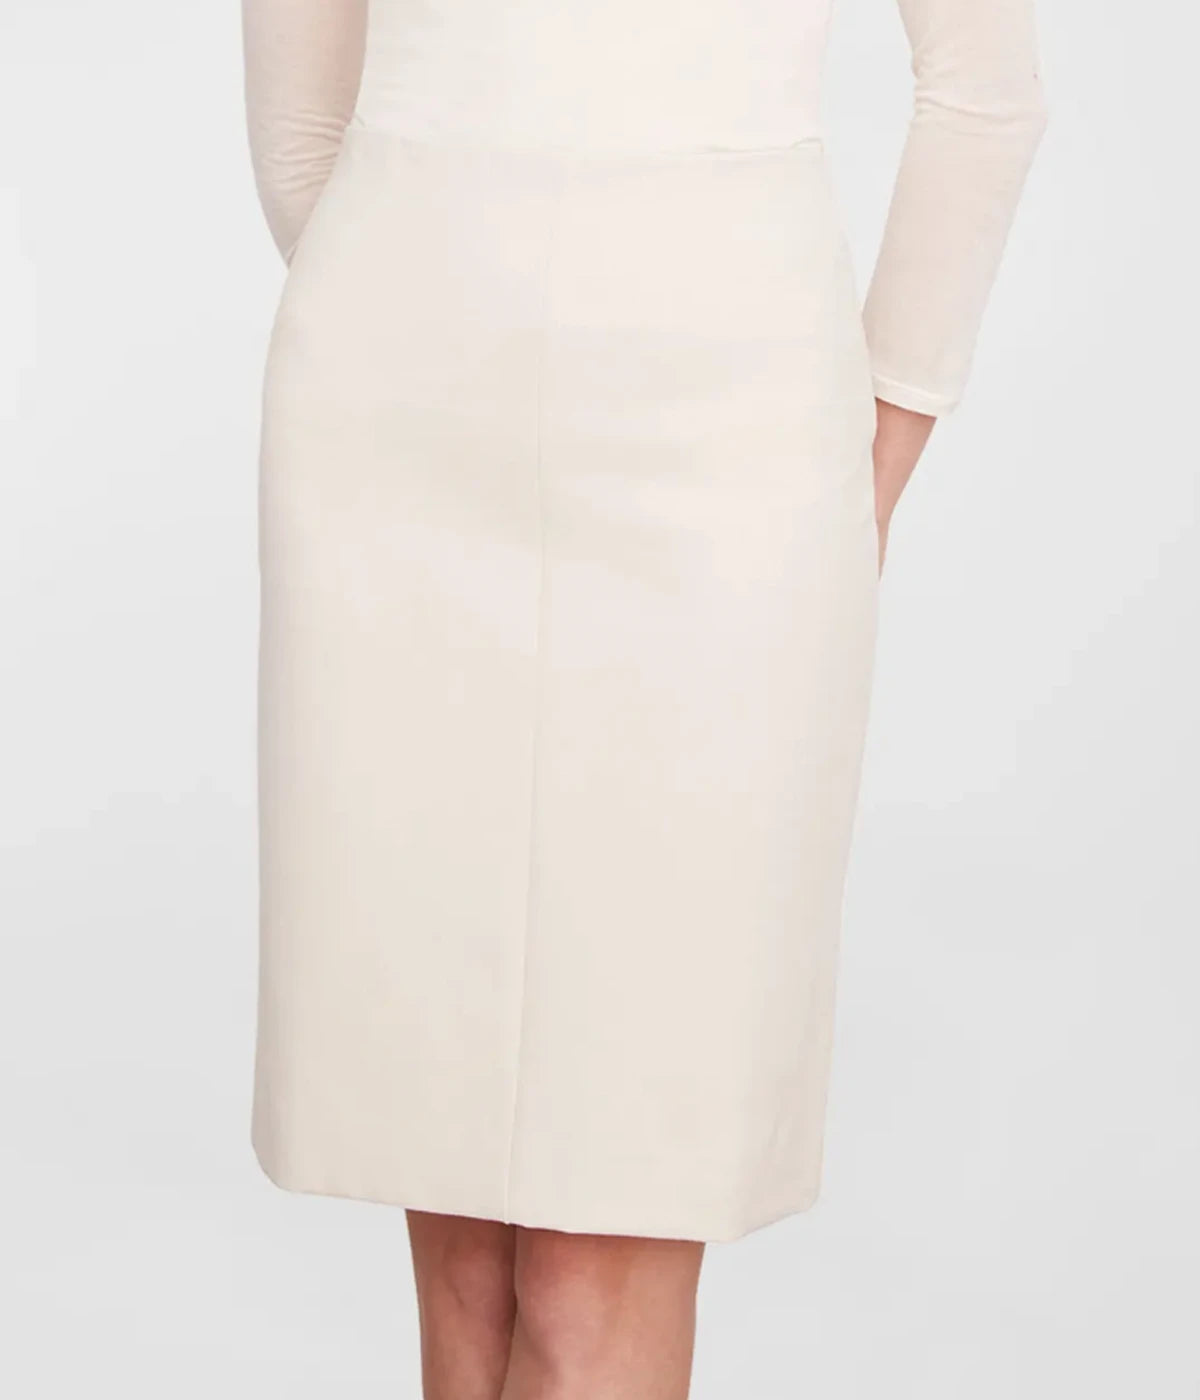 Seamed Front Pencil Skirt in Pale